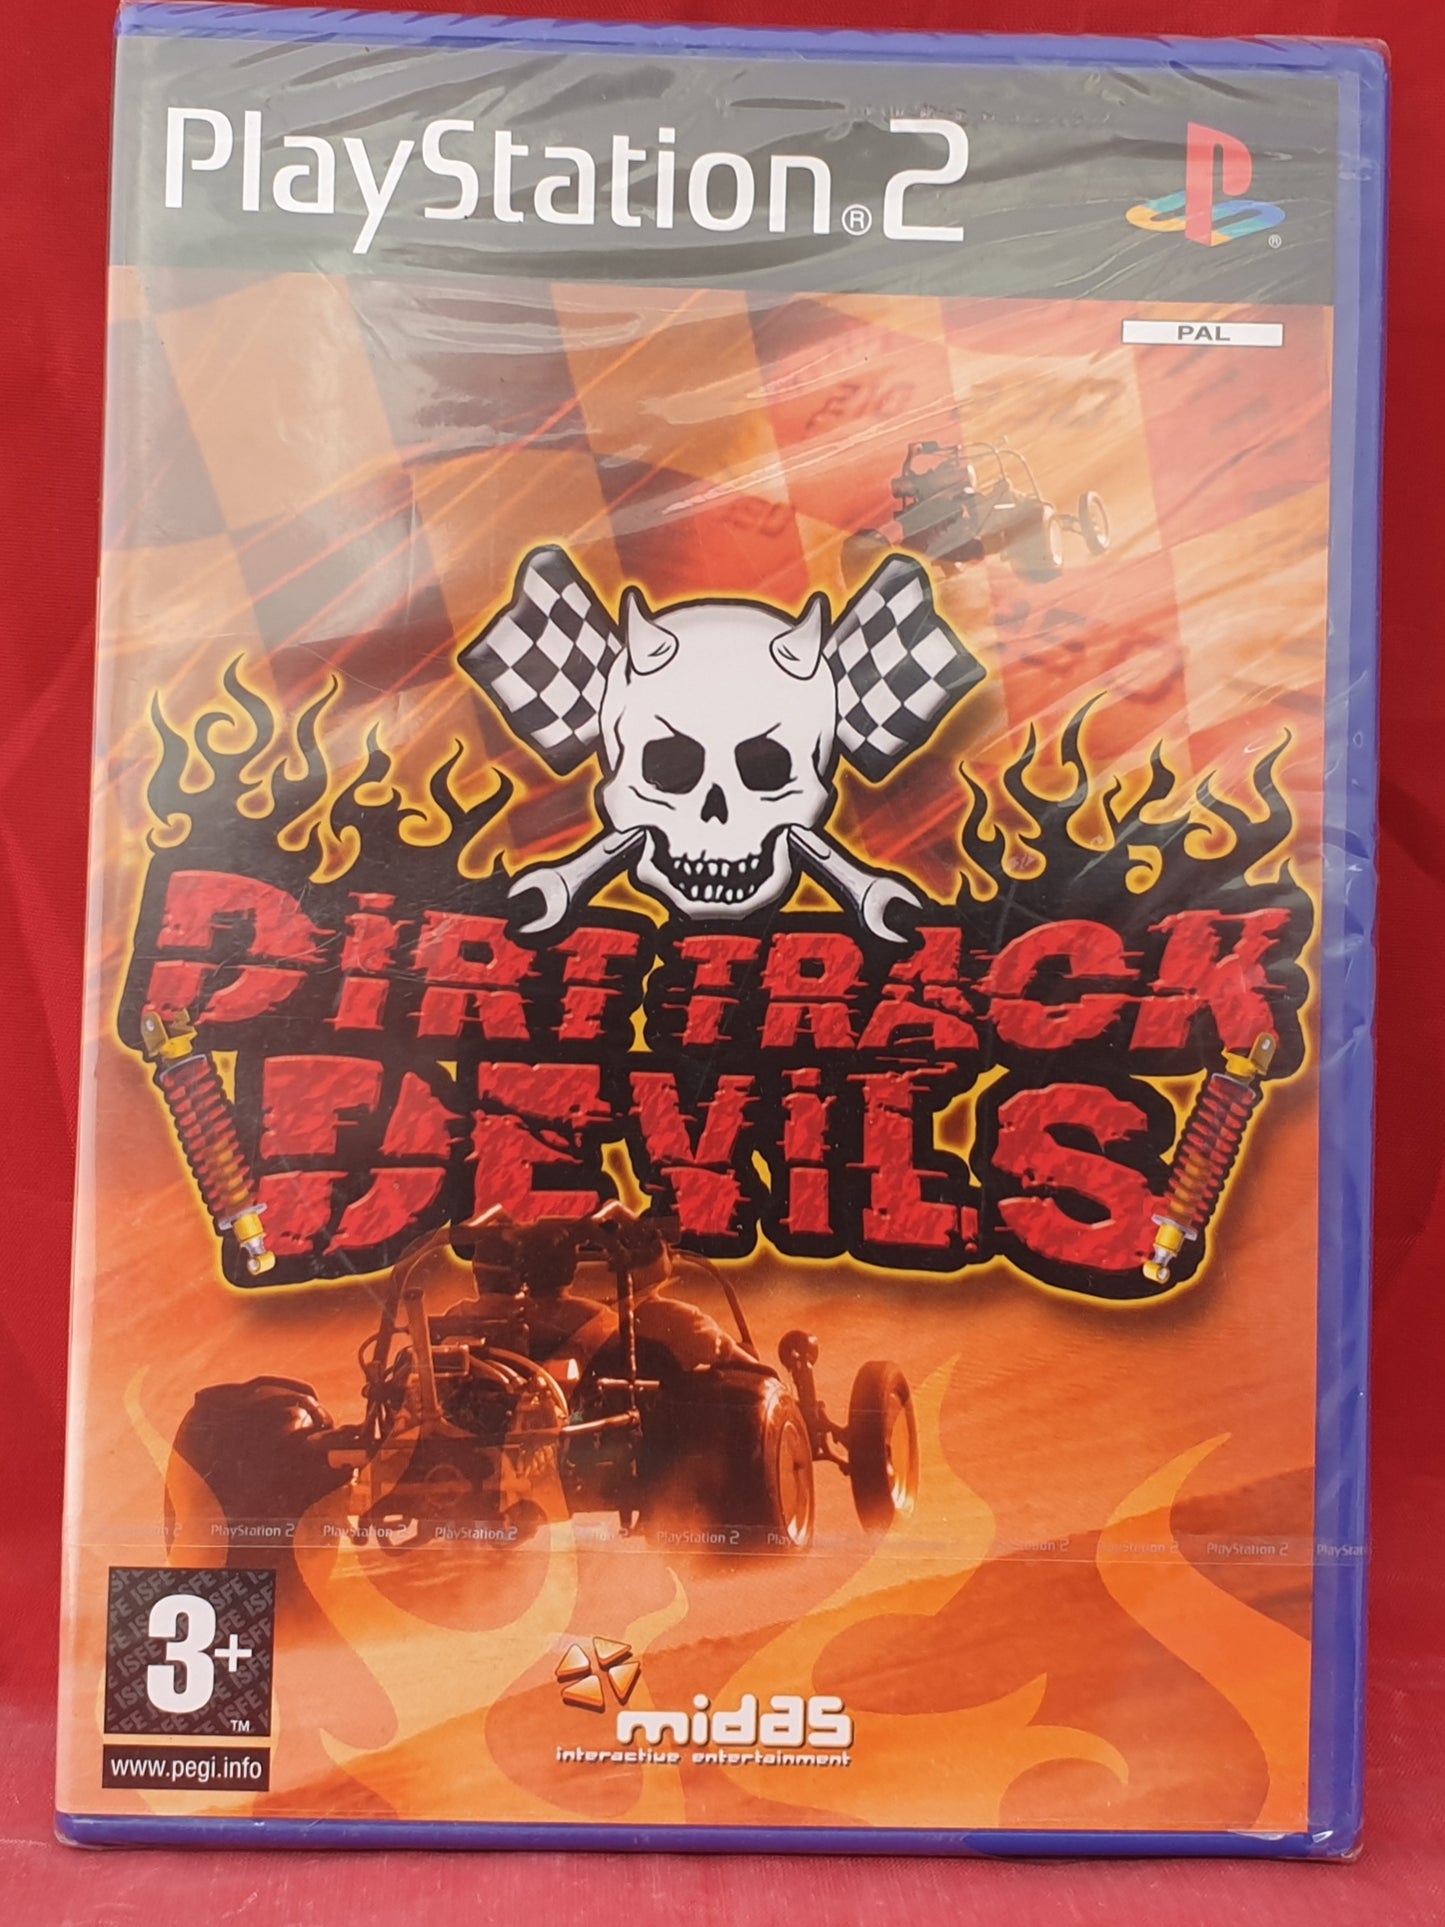 Brand New and Sealed Dirt Track Devils AKA The Offroad Buggy Sony Playstation 2 (PS2) Game